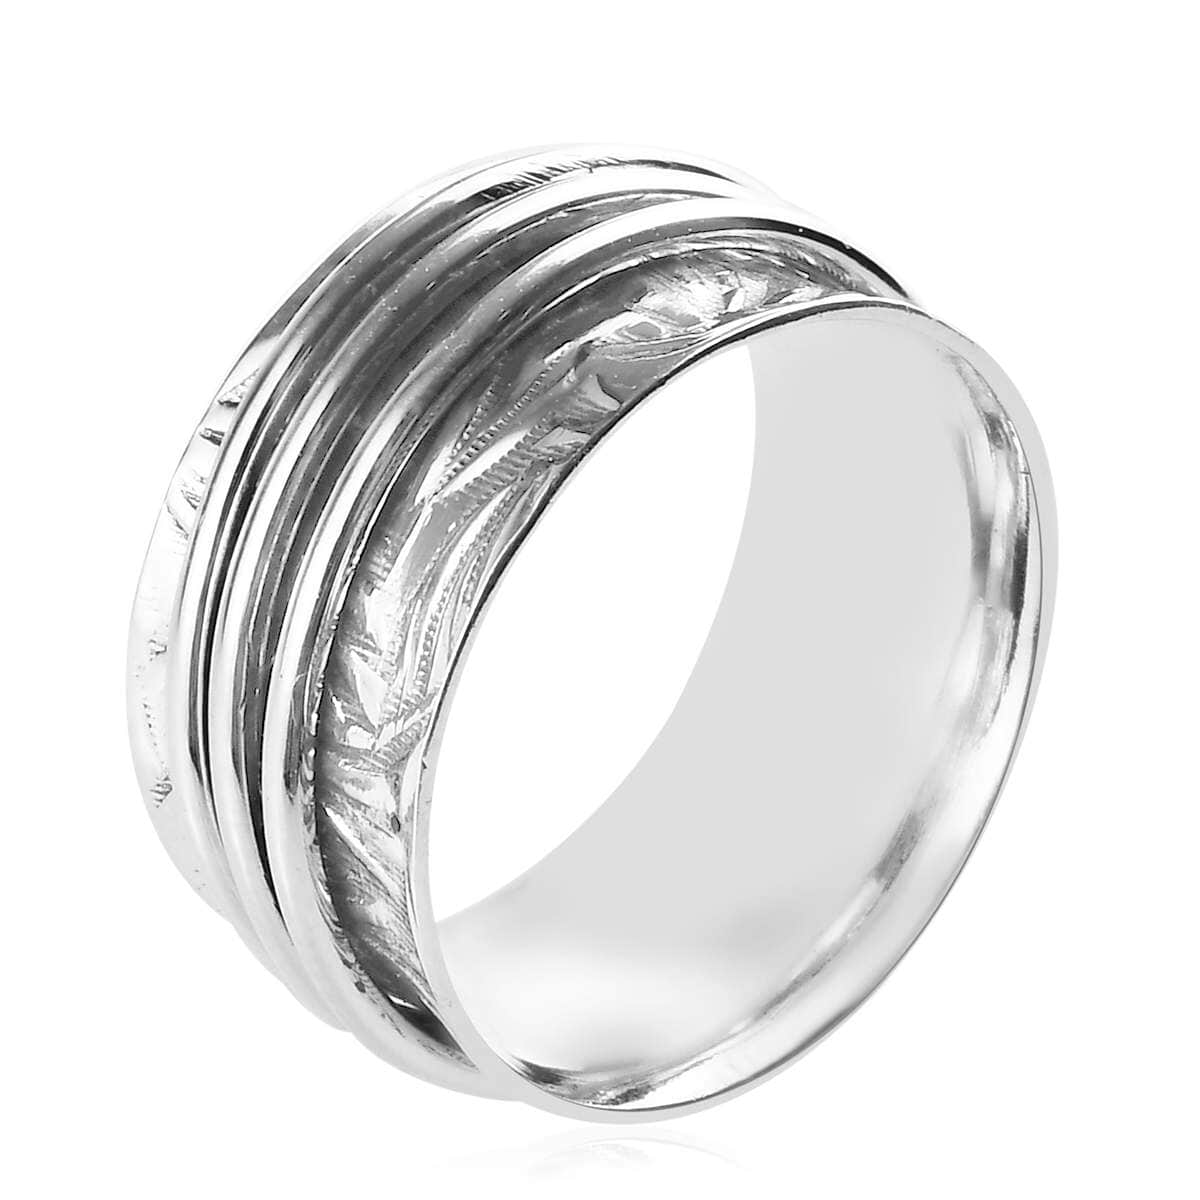 Spinner Ring in Sterling Silver, Anxiety Ring for Women, Fidget Rings for Anxiety for Women, Stress Relieving Anxiety Ring (Size 9.0) (5.85 g) image number 3